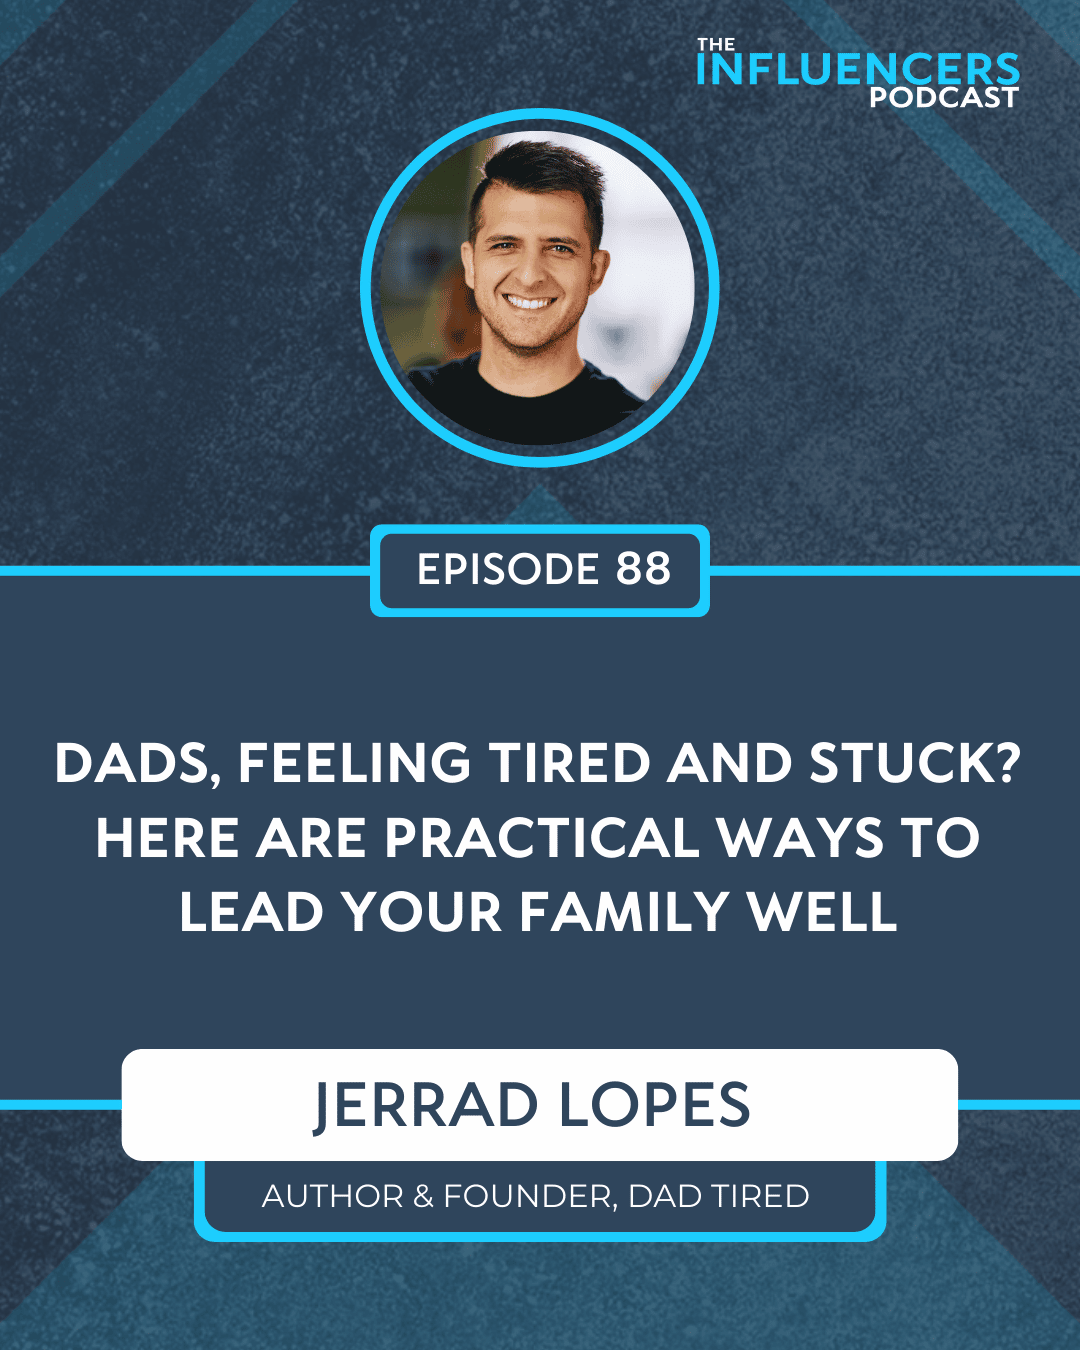 Episode 86 with Jerrad Lopes.